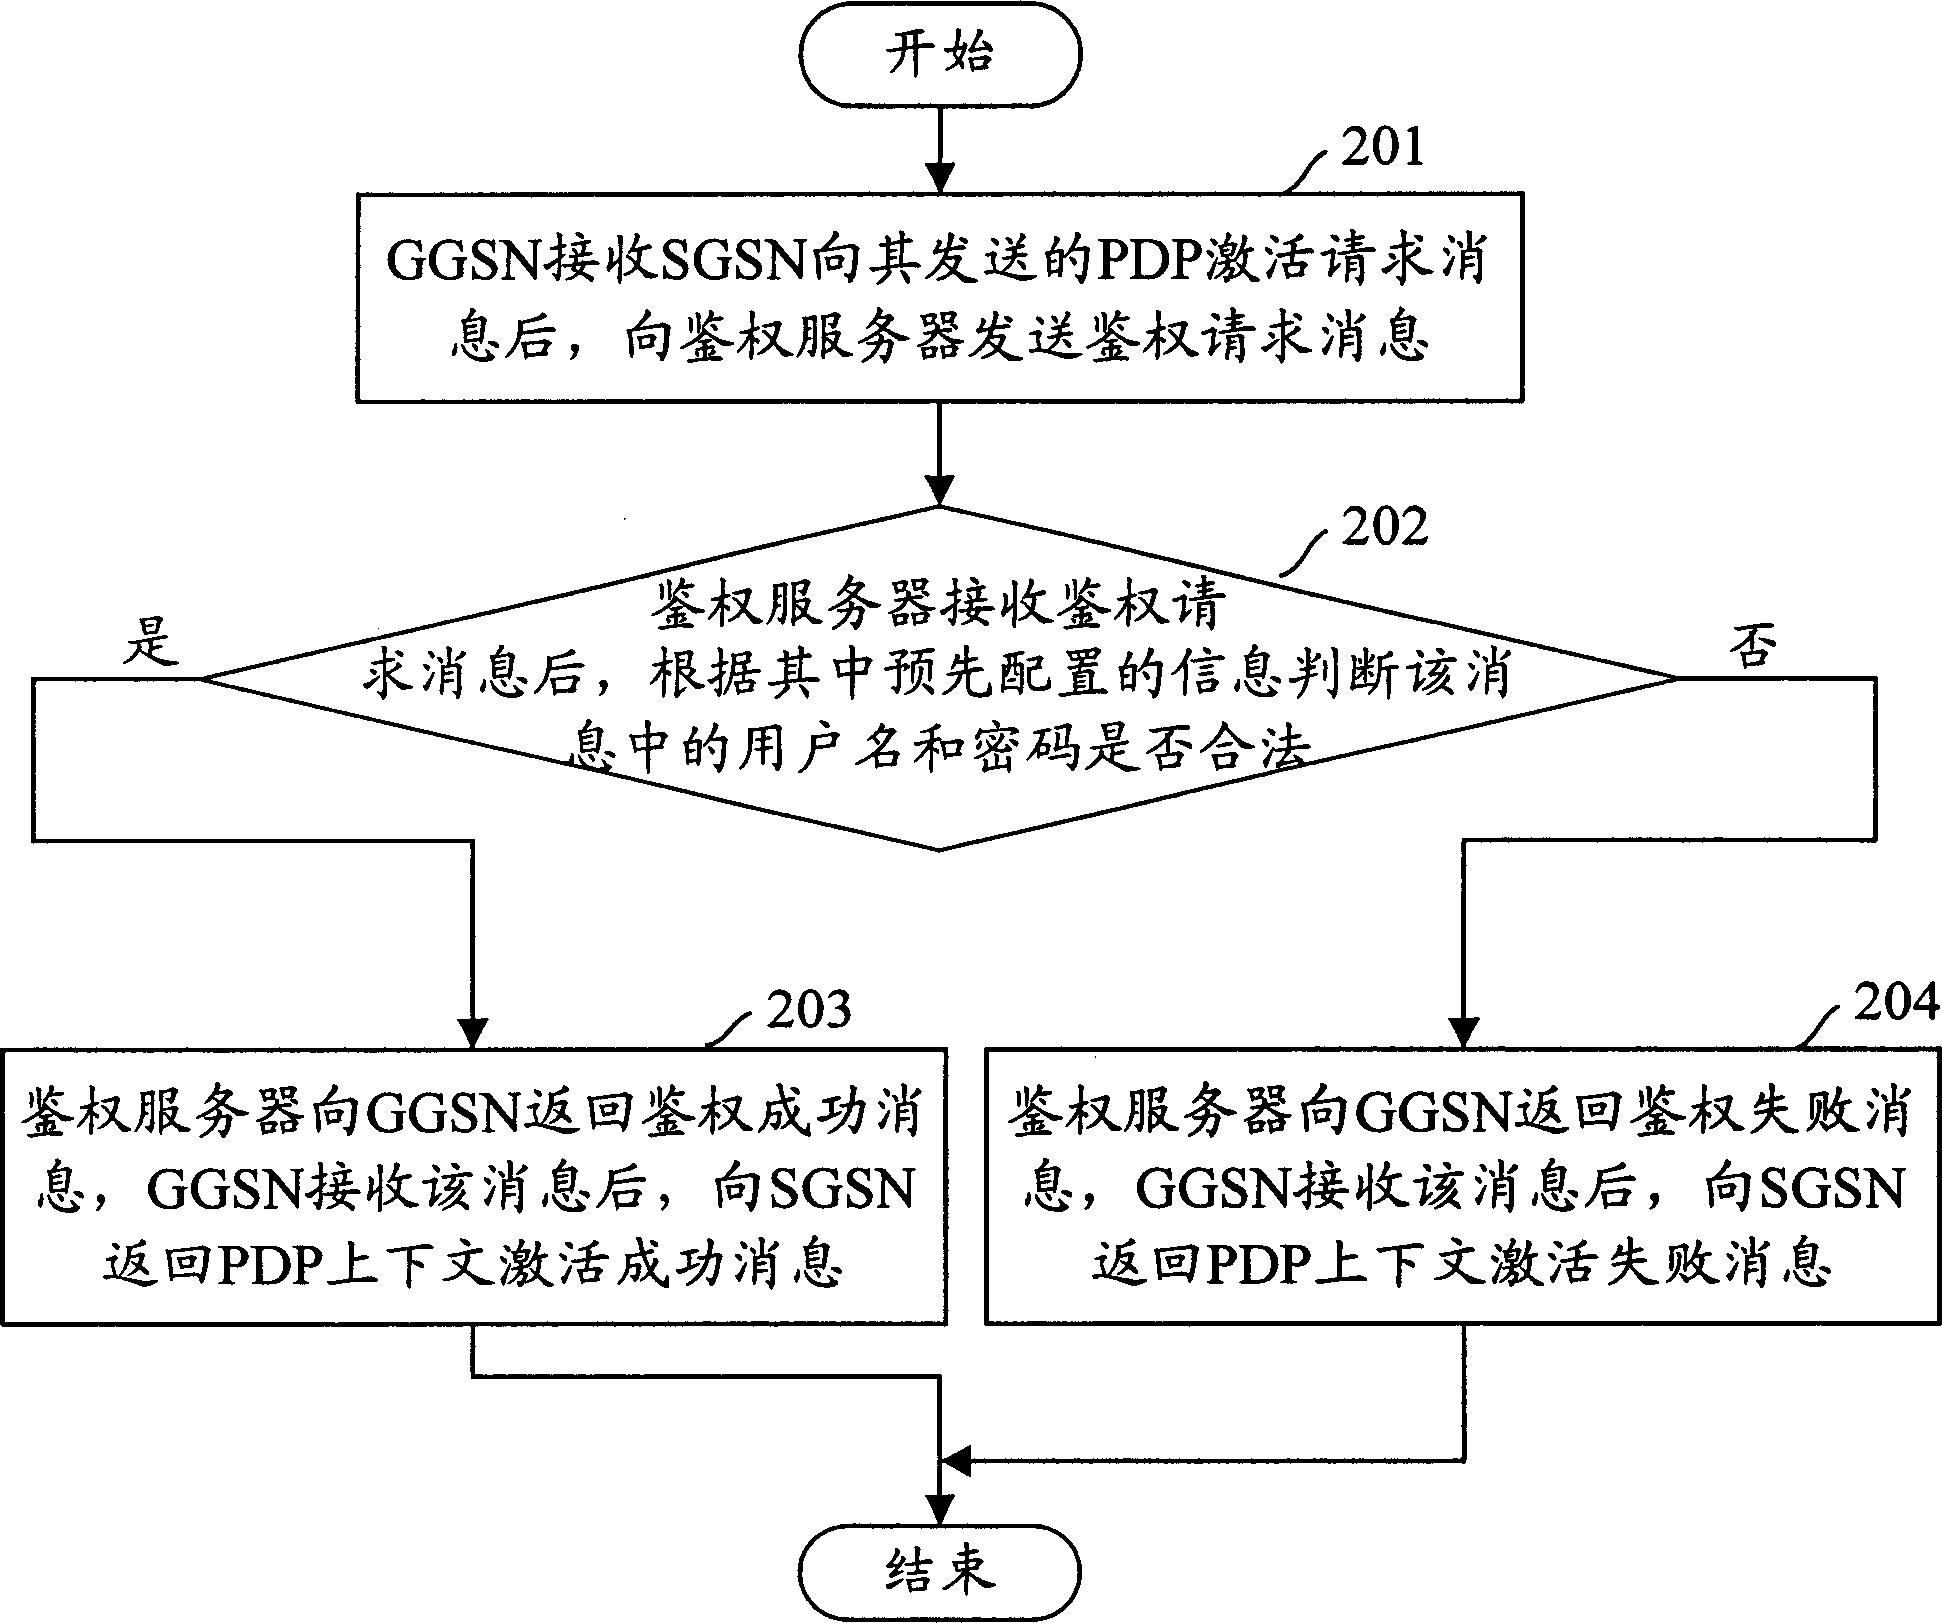 Method for identifying authority in wireless group business